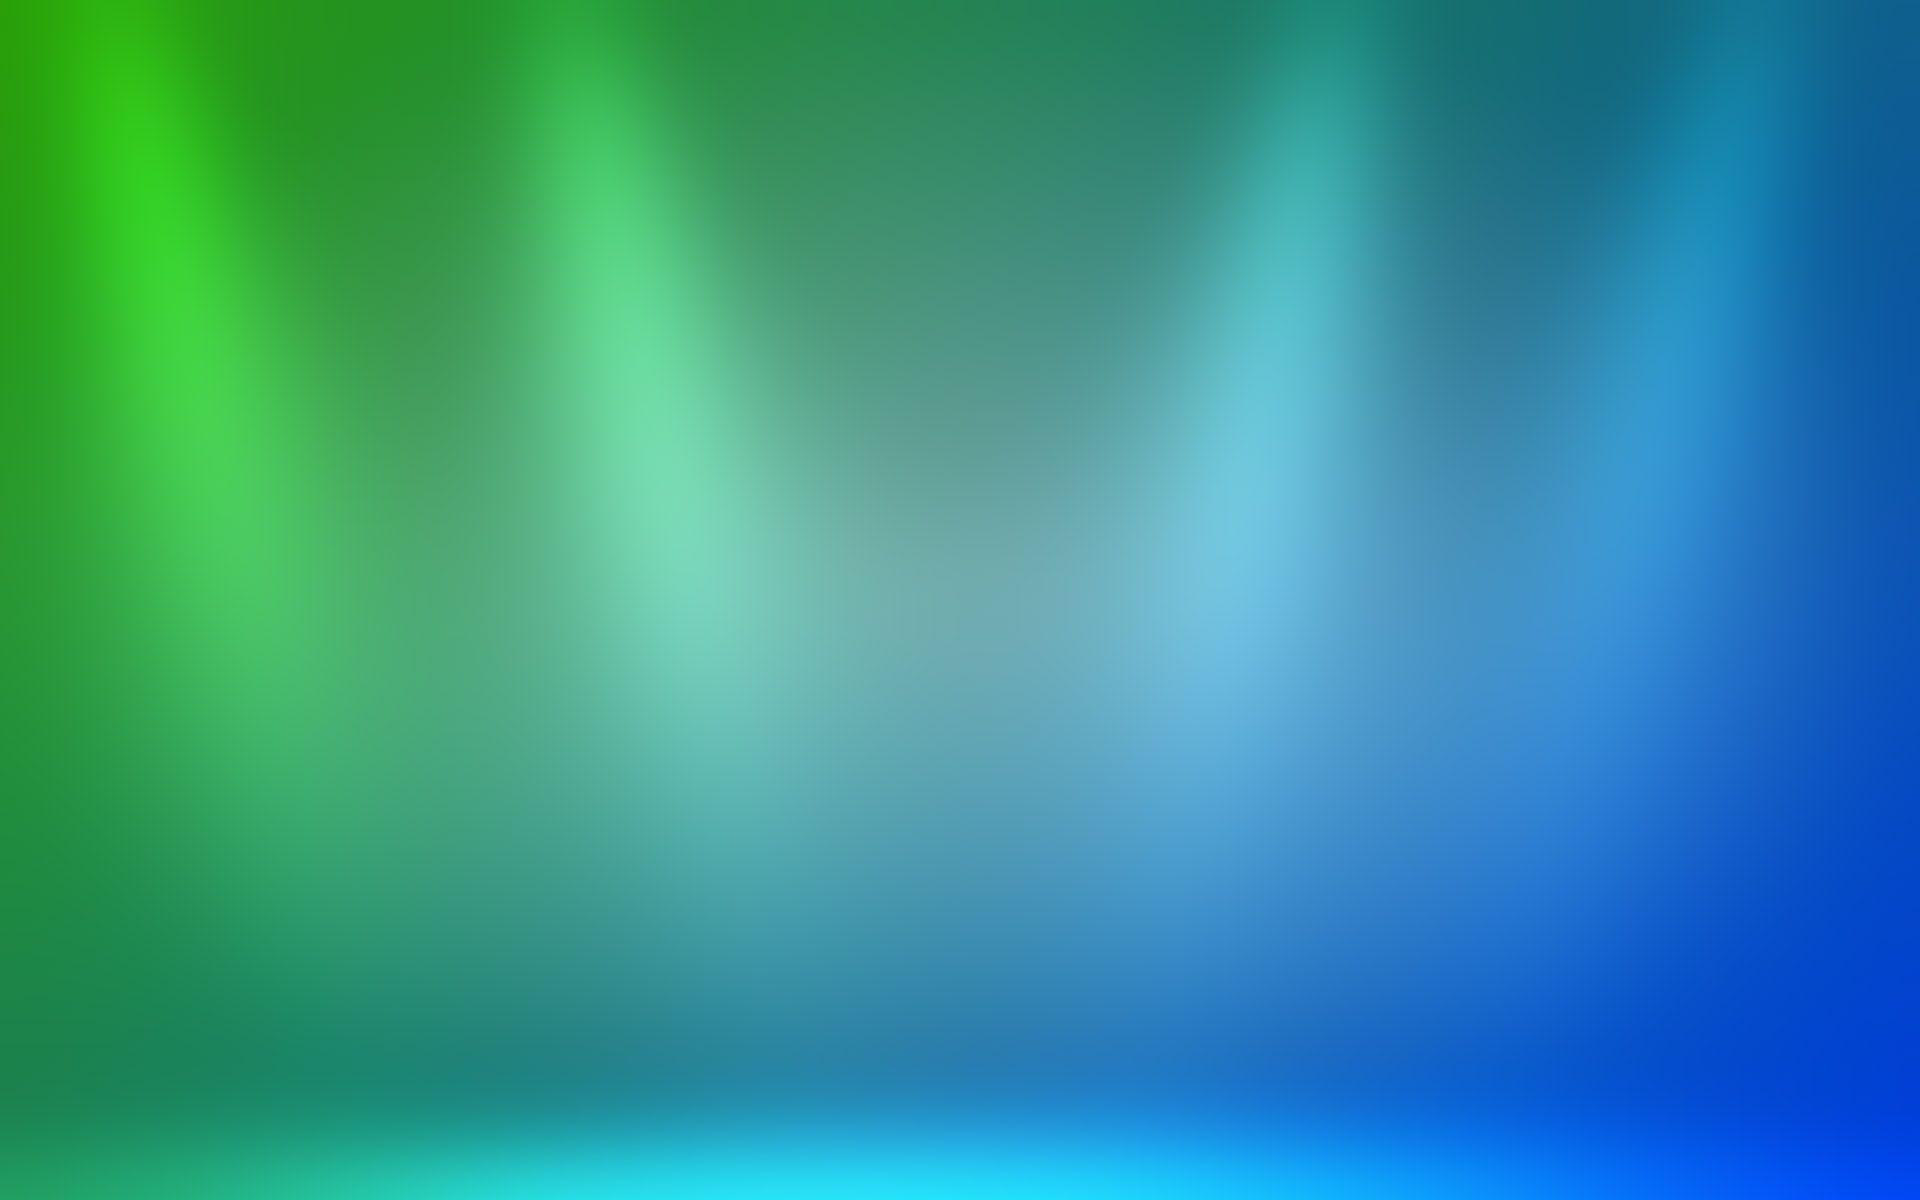 Light Blue and Green Wallpapers - Top Free Light Blue and Green